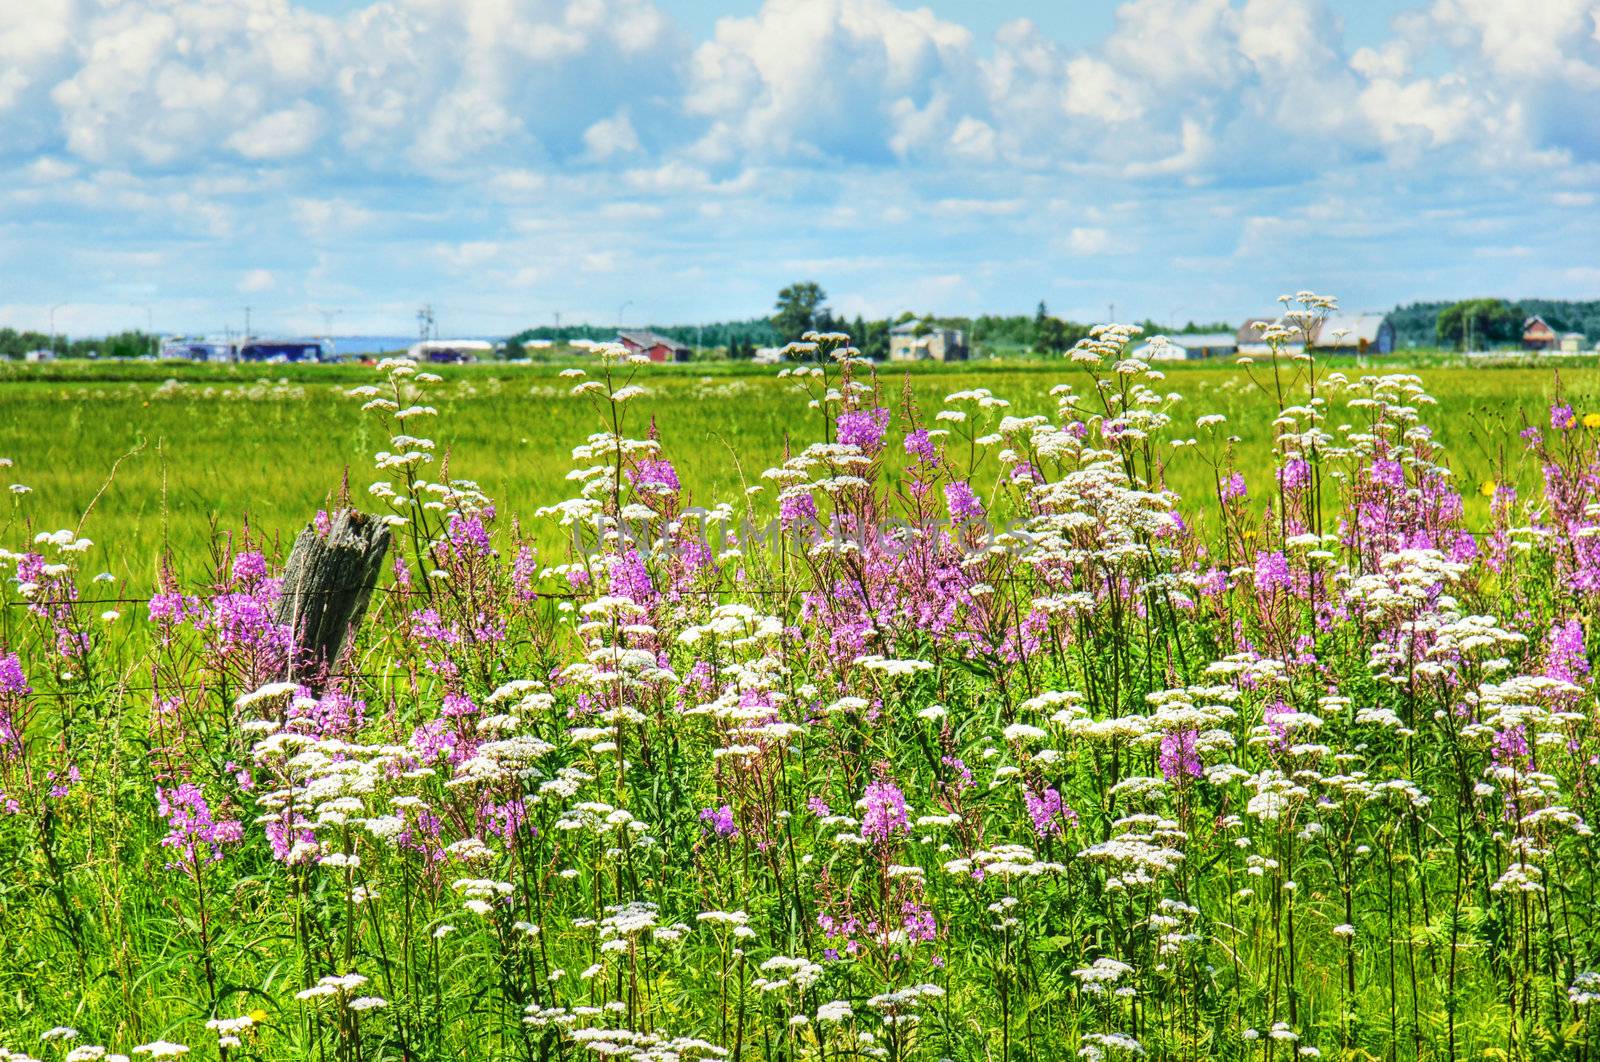 Beautiful HDR rural landscape: wildflowers, invasive purple loosestrife and white valerian, alongside the road in Quebec, Canada.